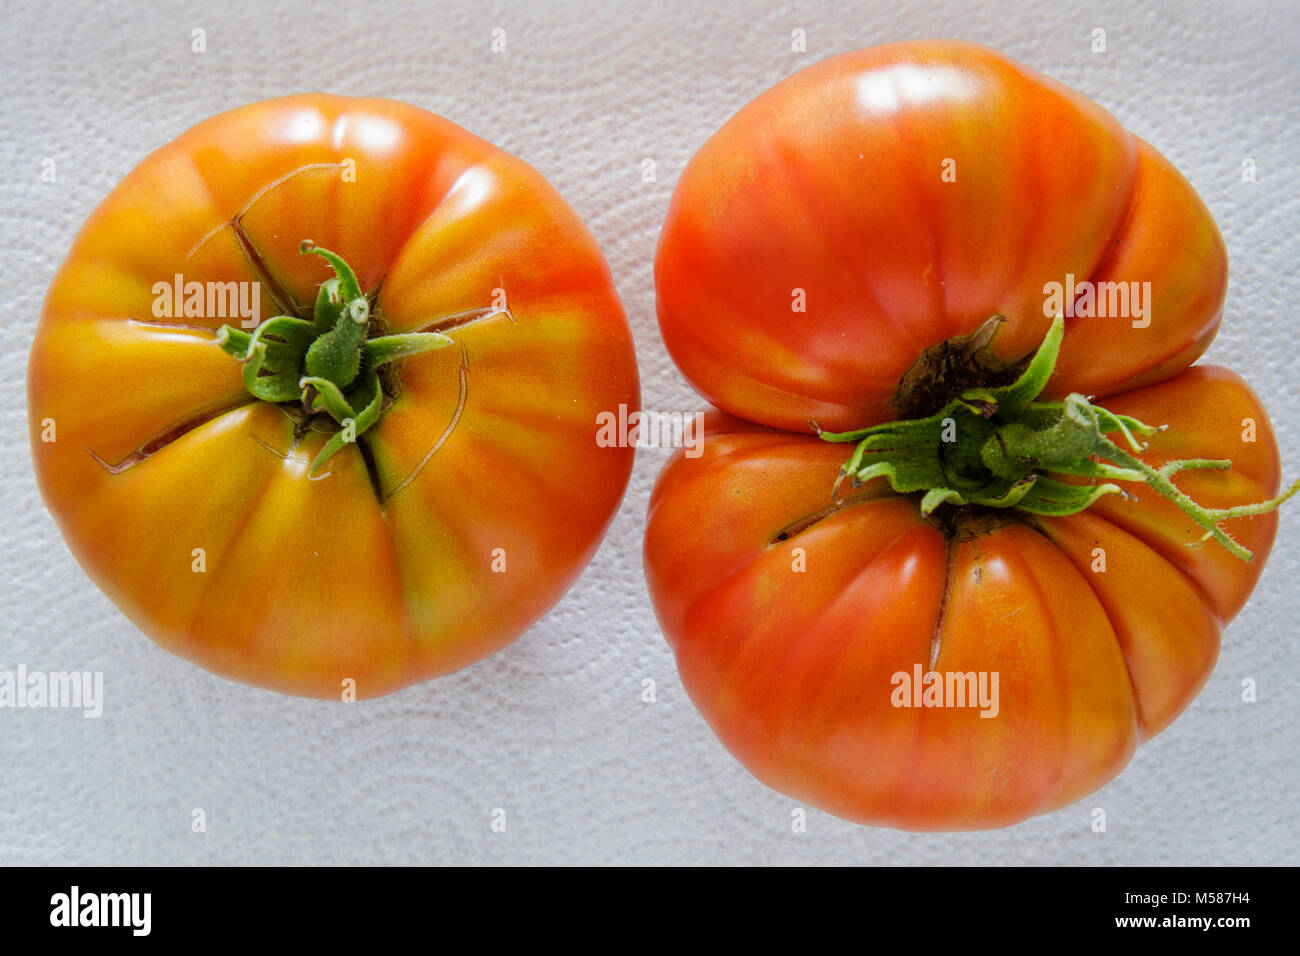 Miami Beach Florida,home grown garden tomatoes,tomatoes,heirloom,turning red,ripe,harvested,symmetrical,asymmetrical,wrinkled,imperfect,fruit,food,org Stock Photo